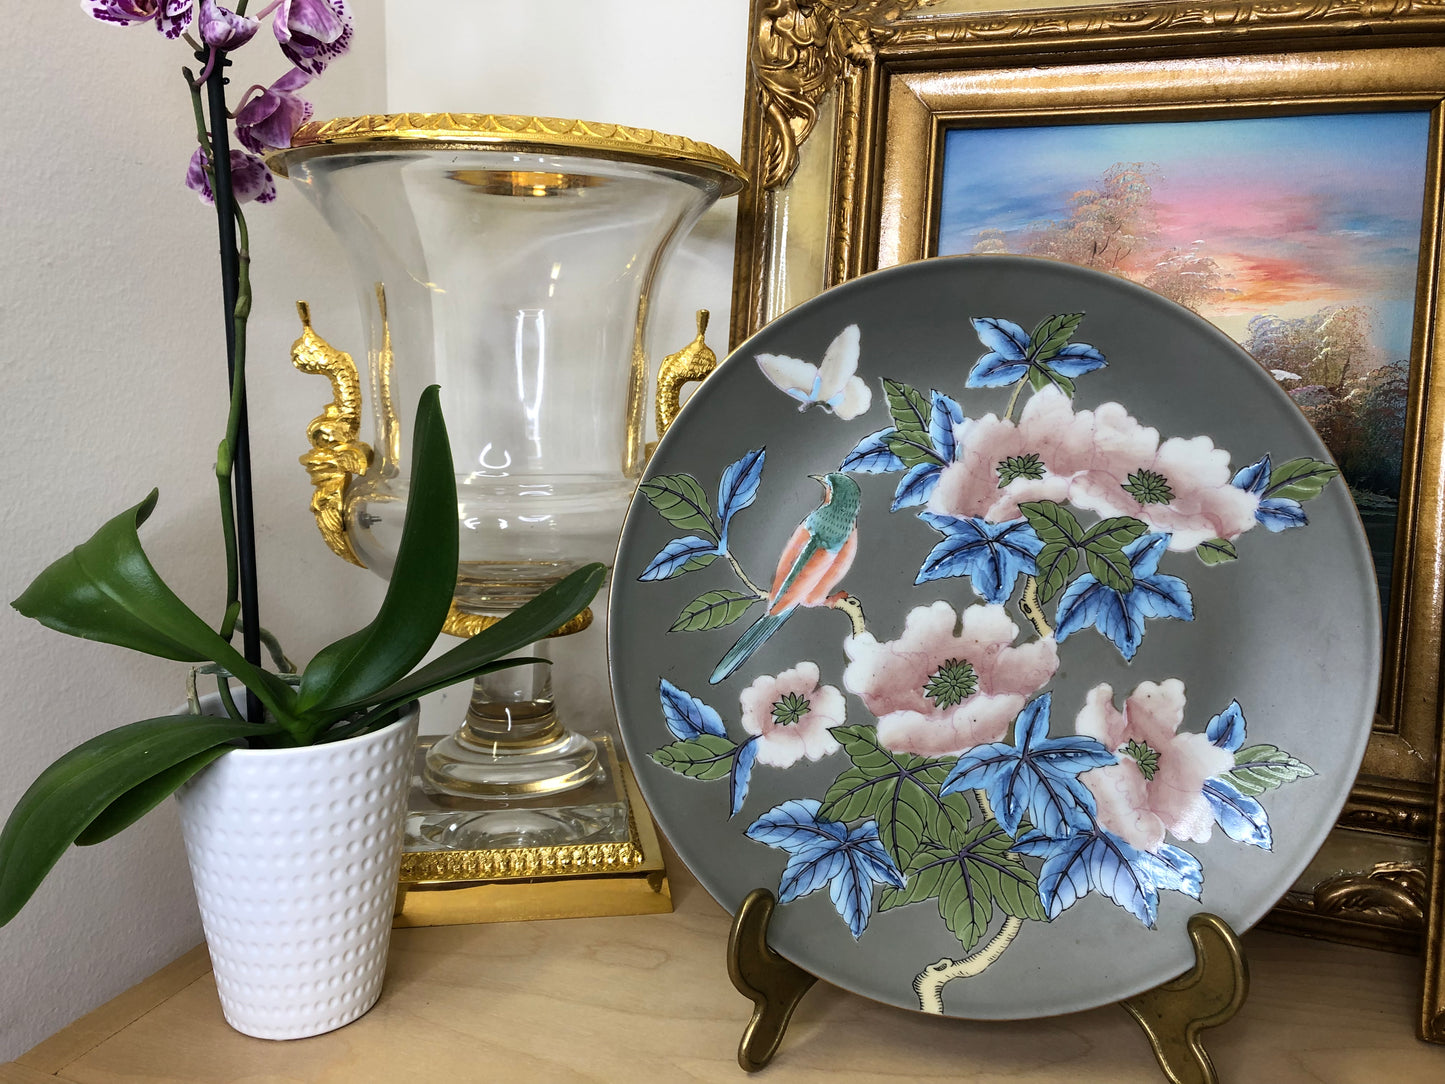 Vintage Chinoiserie Plate with Bird and Flowers- Excellent Condition!